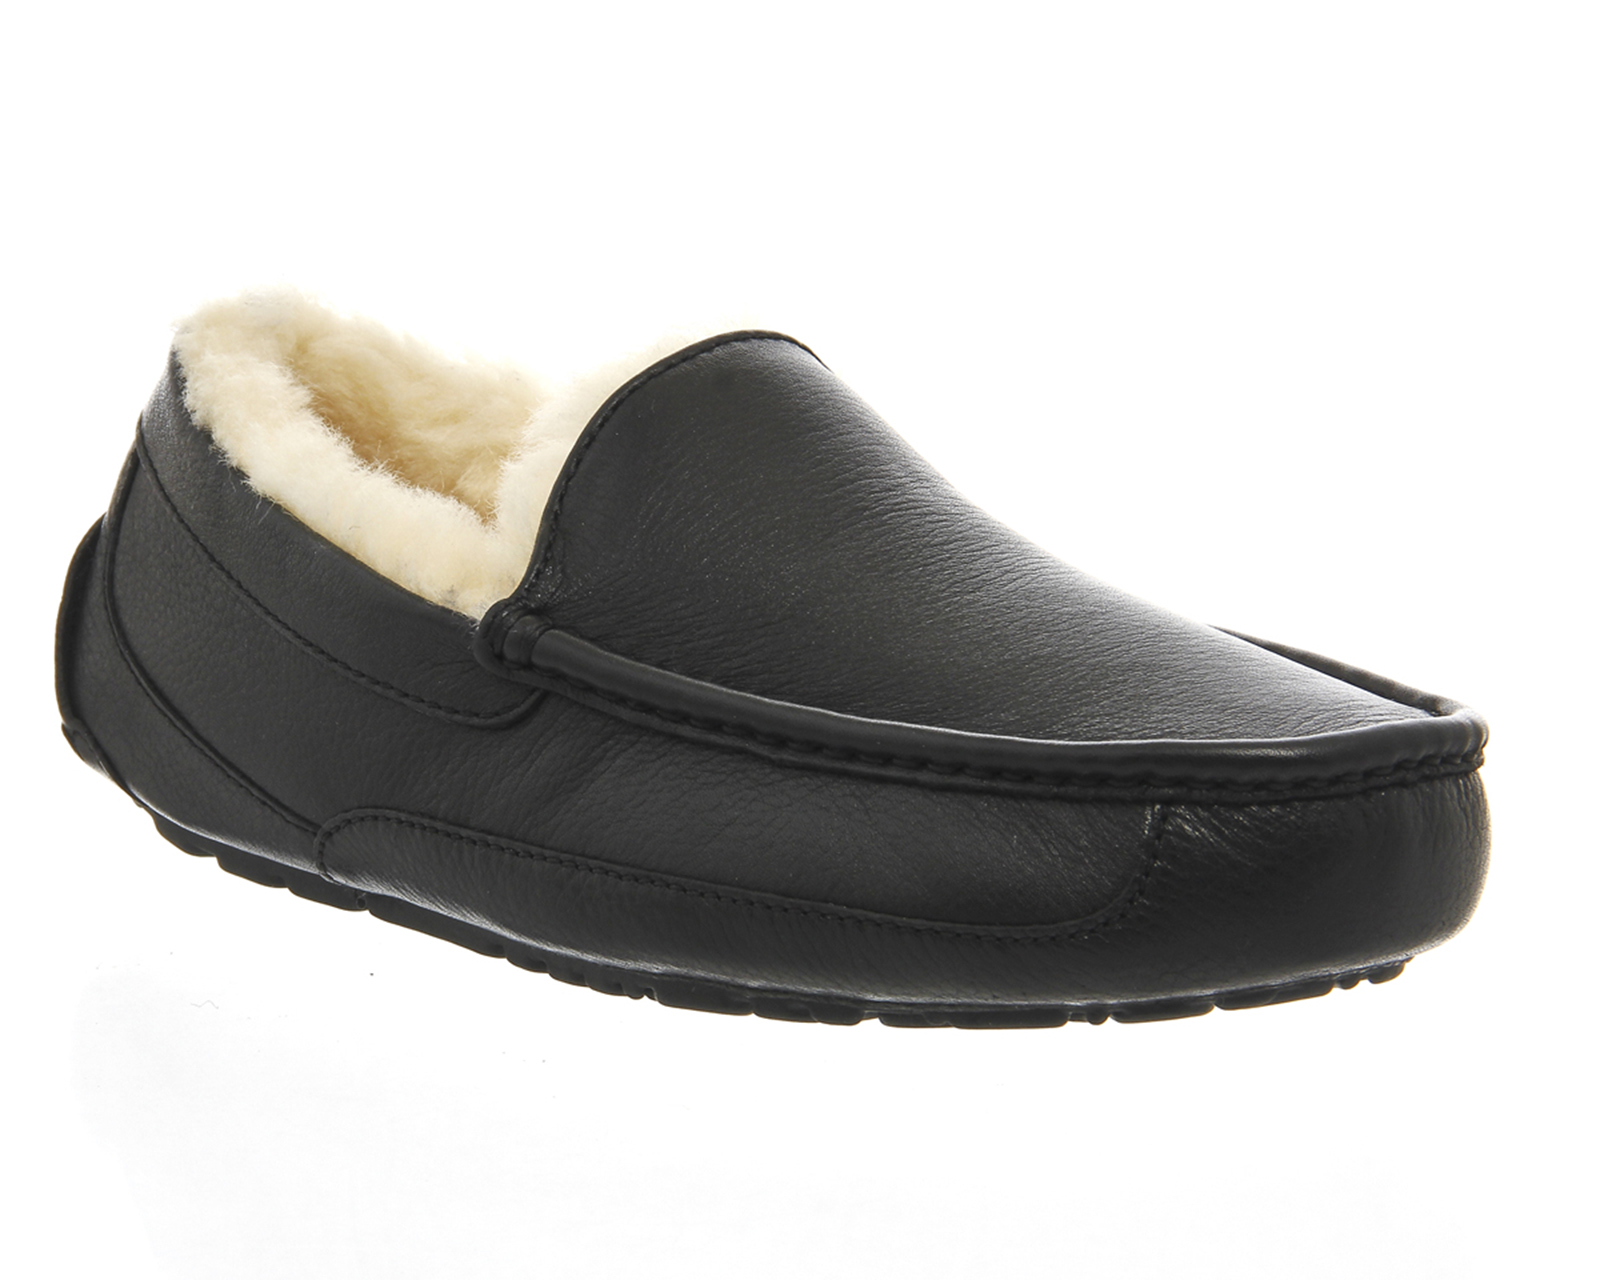 ugg ascot leather slippers sale Cheaper 